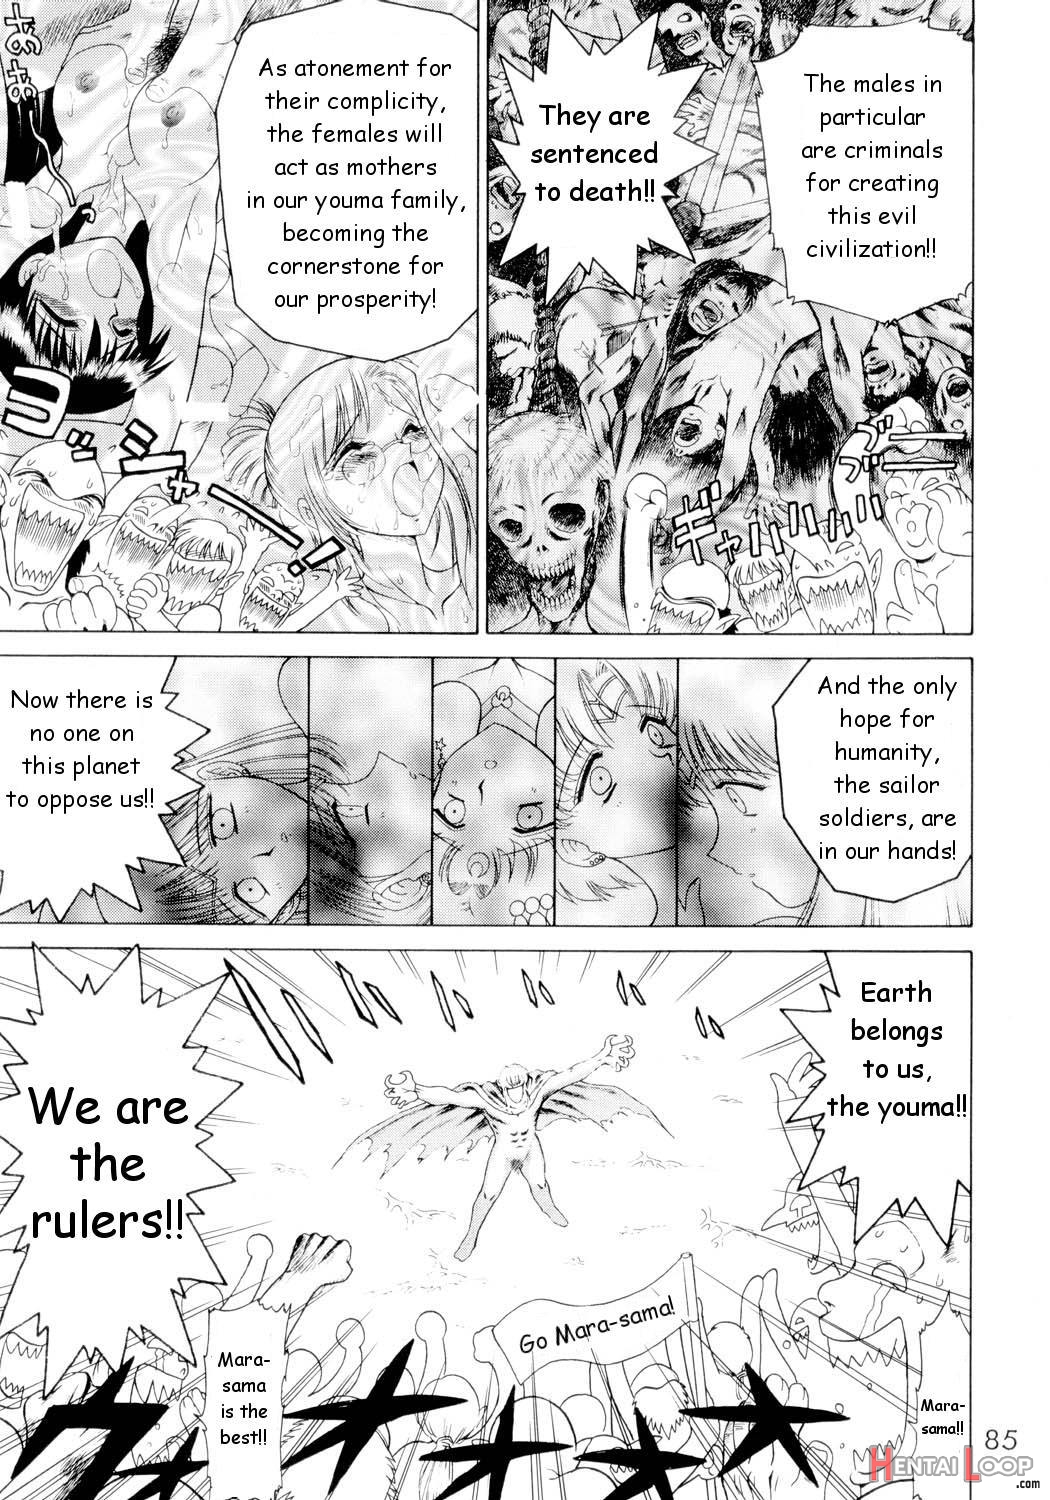 Submission Sailorstars page 84